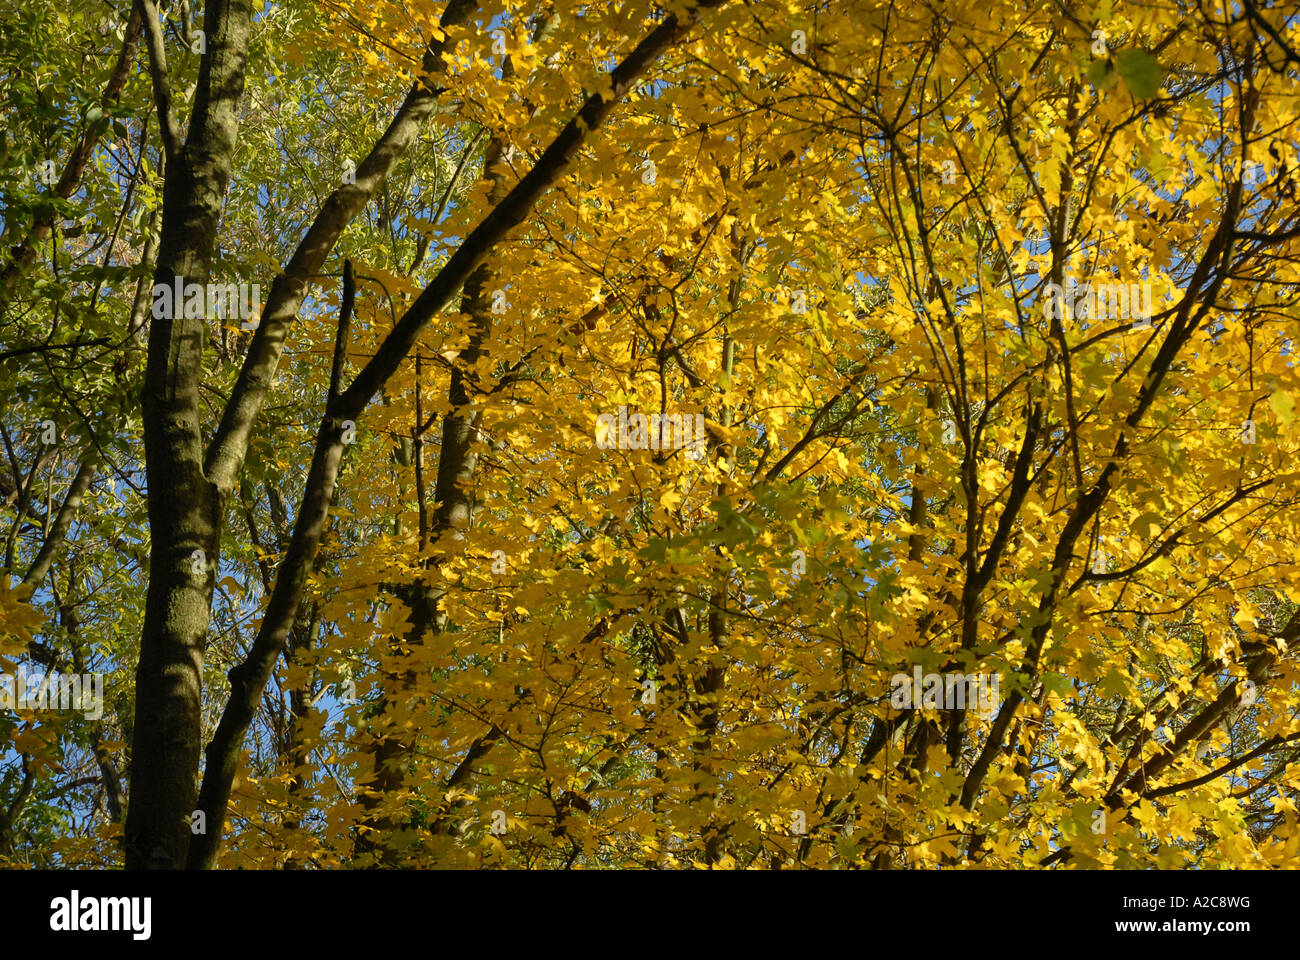 Autumnal leaves on trees in Redditch Worcestershire England Stock Photo